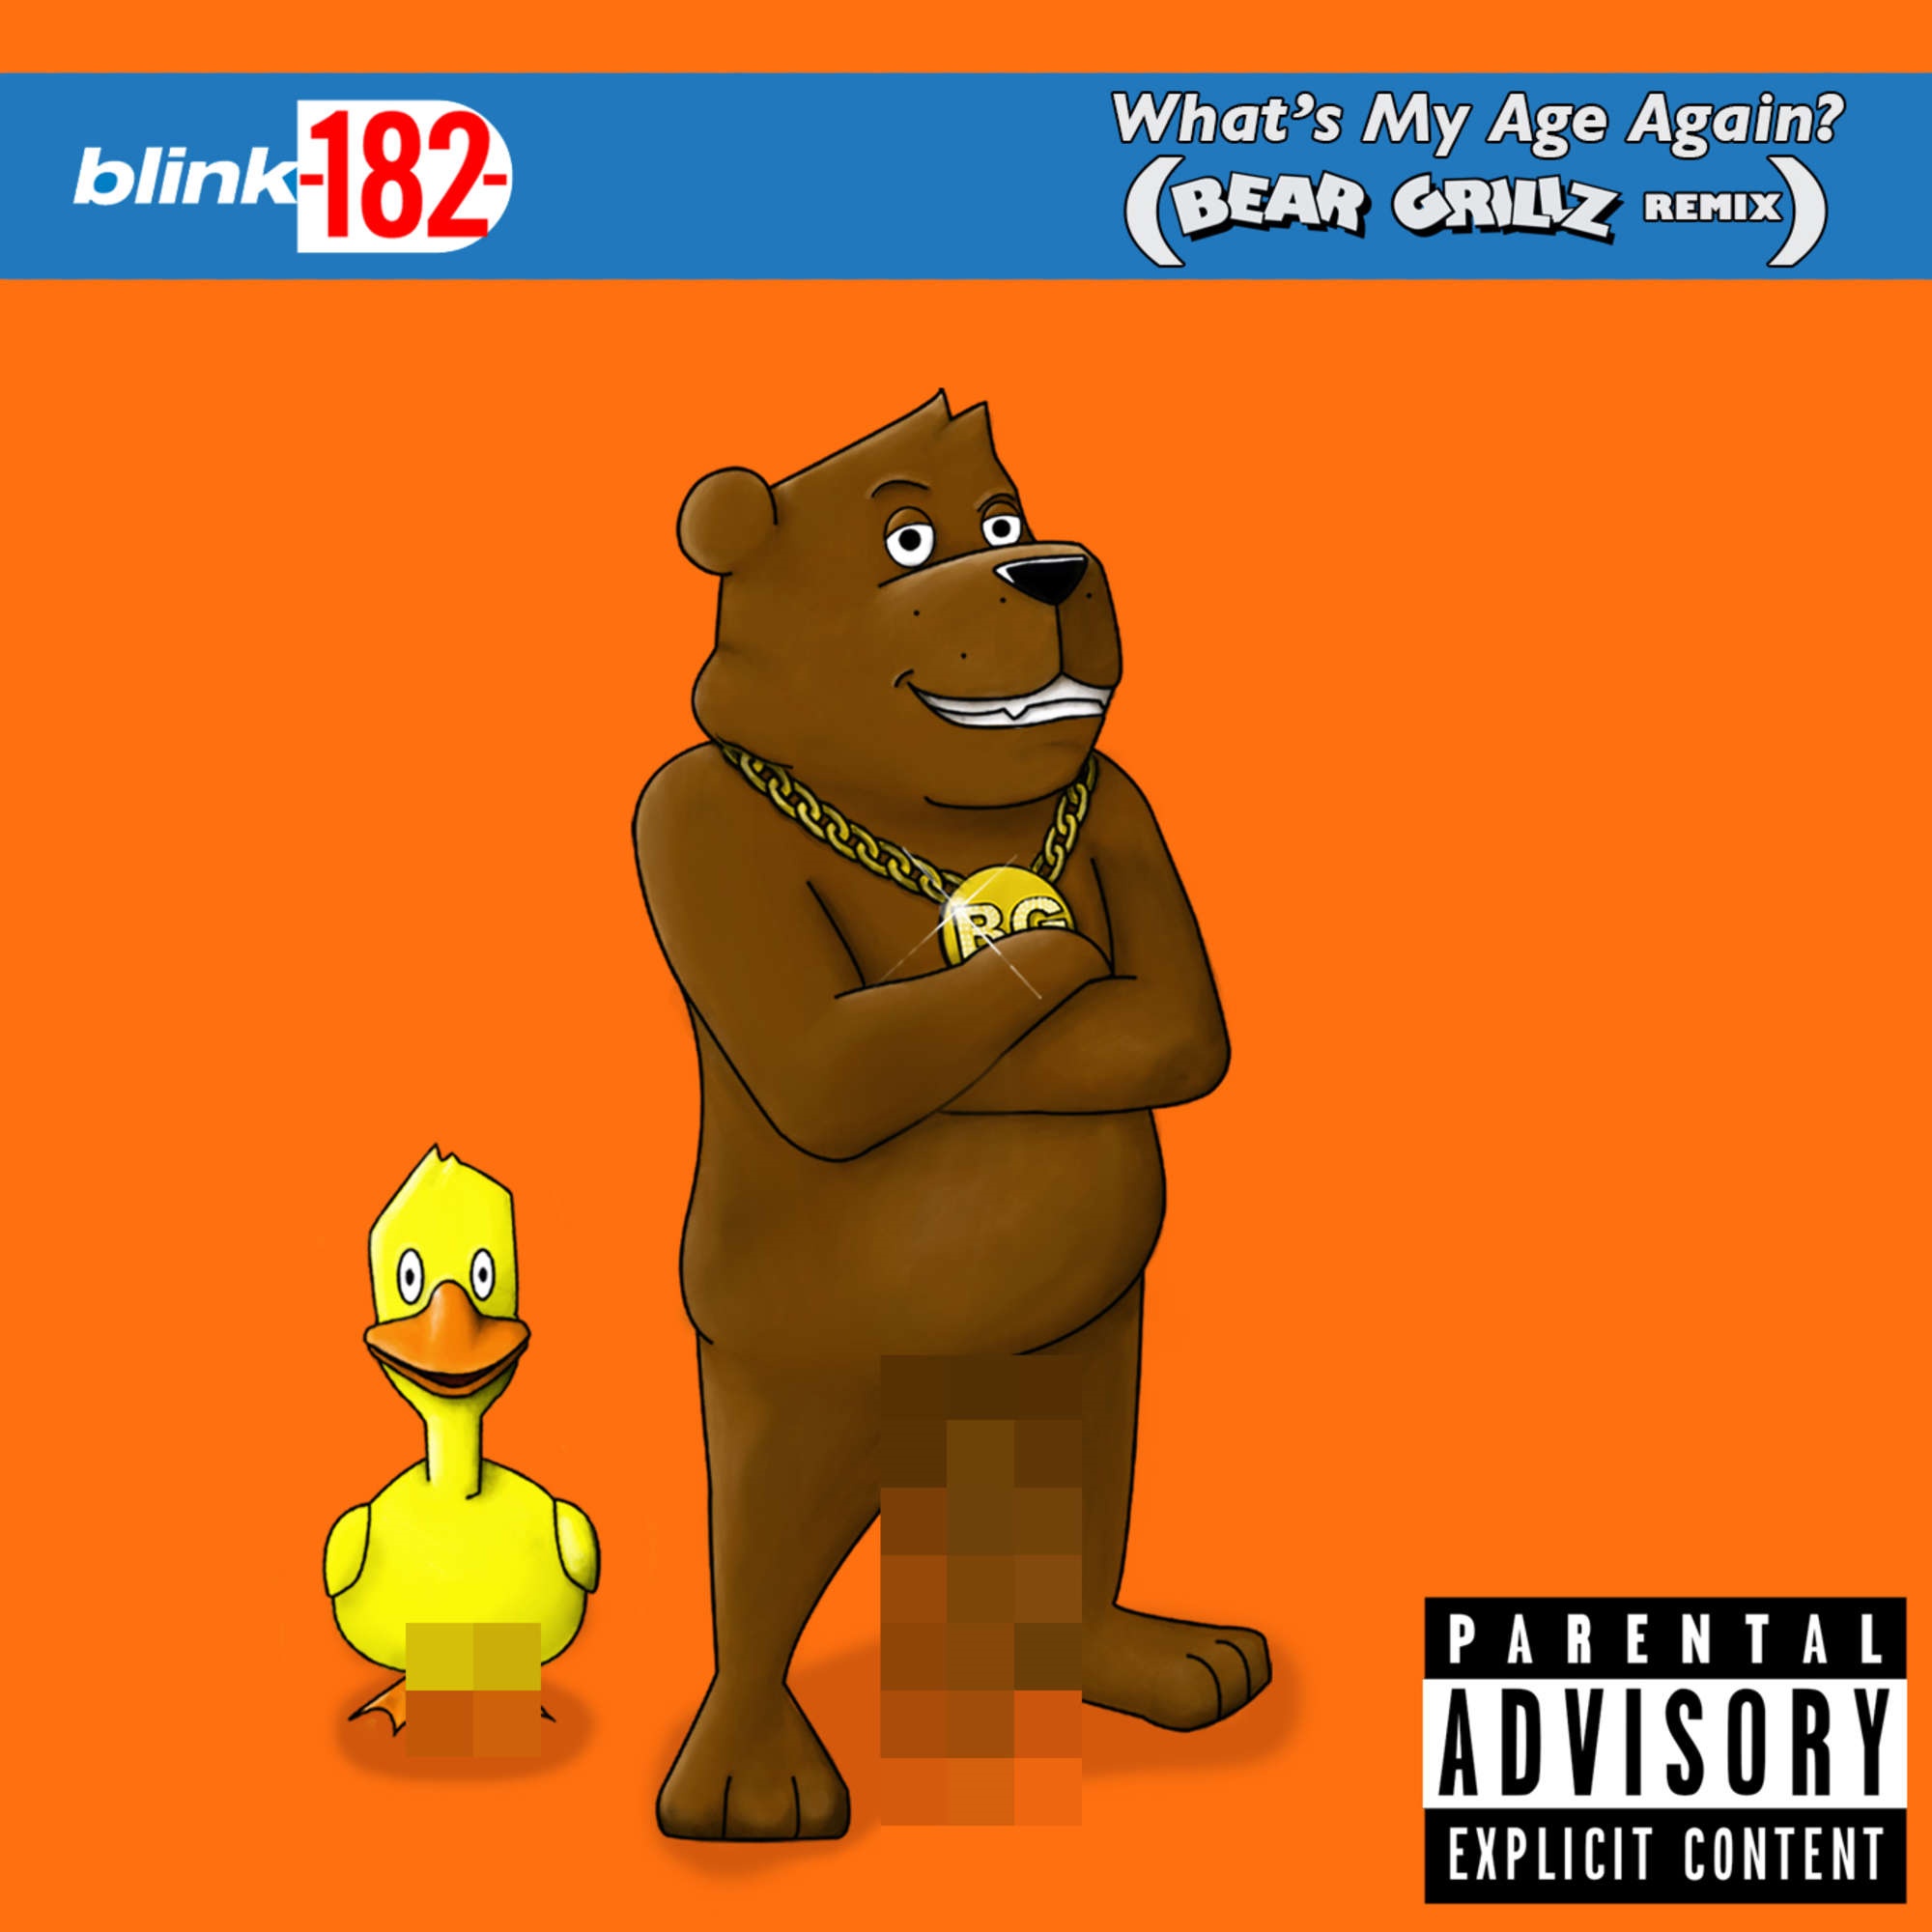 What's My Age Again? (Bear Grillz Remix)